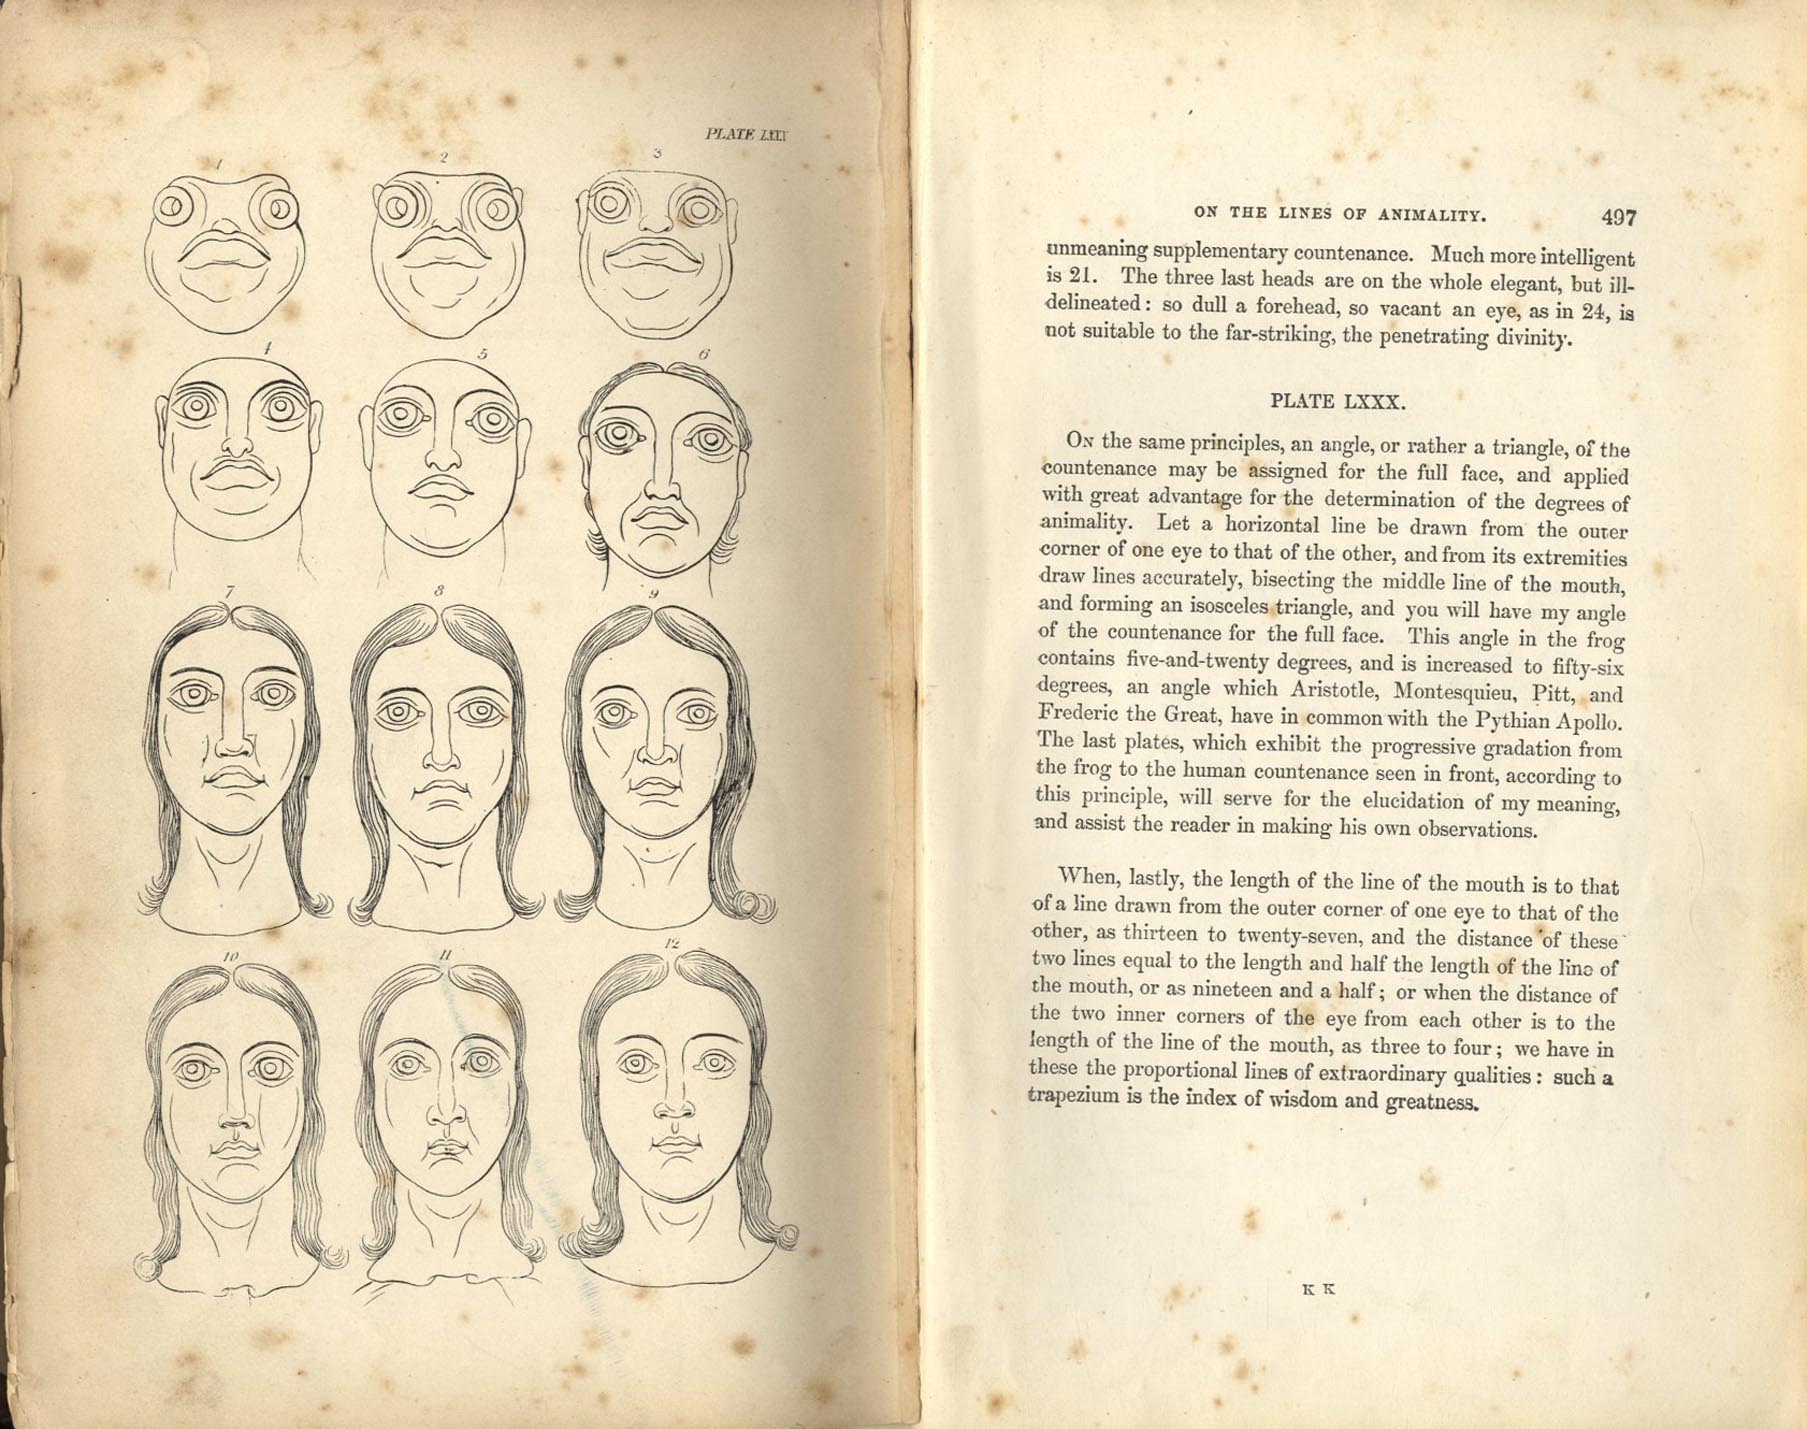 Lavater's Physiognomy, 1880 edition, From the Frog to the Apollo Belvedere